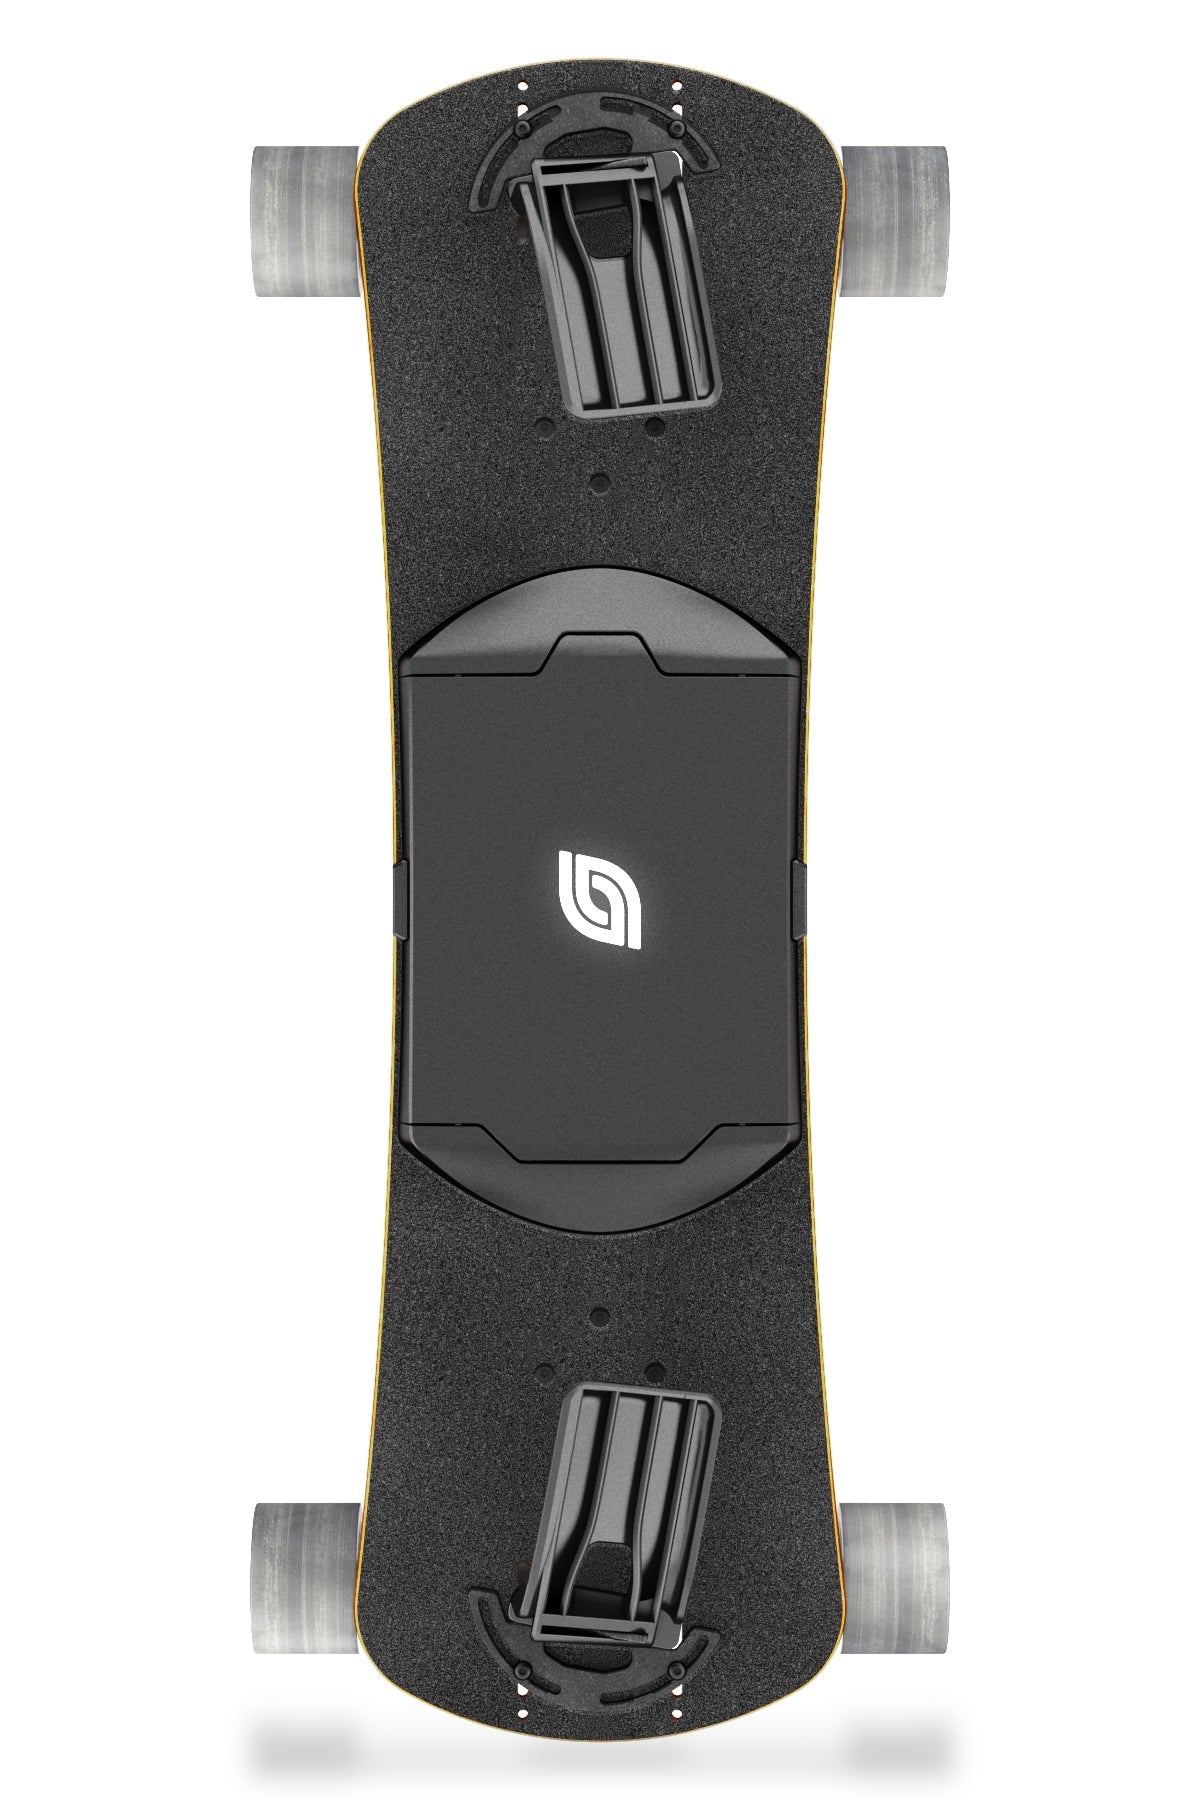 SBX Pro Pack by Summerboard